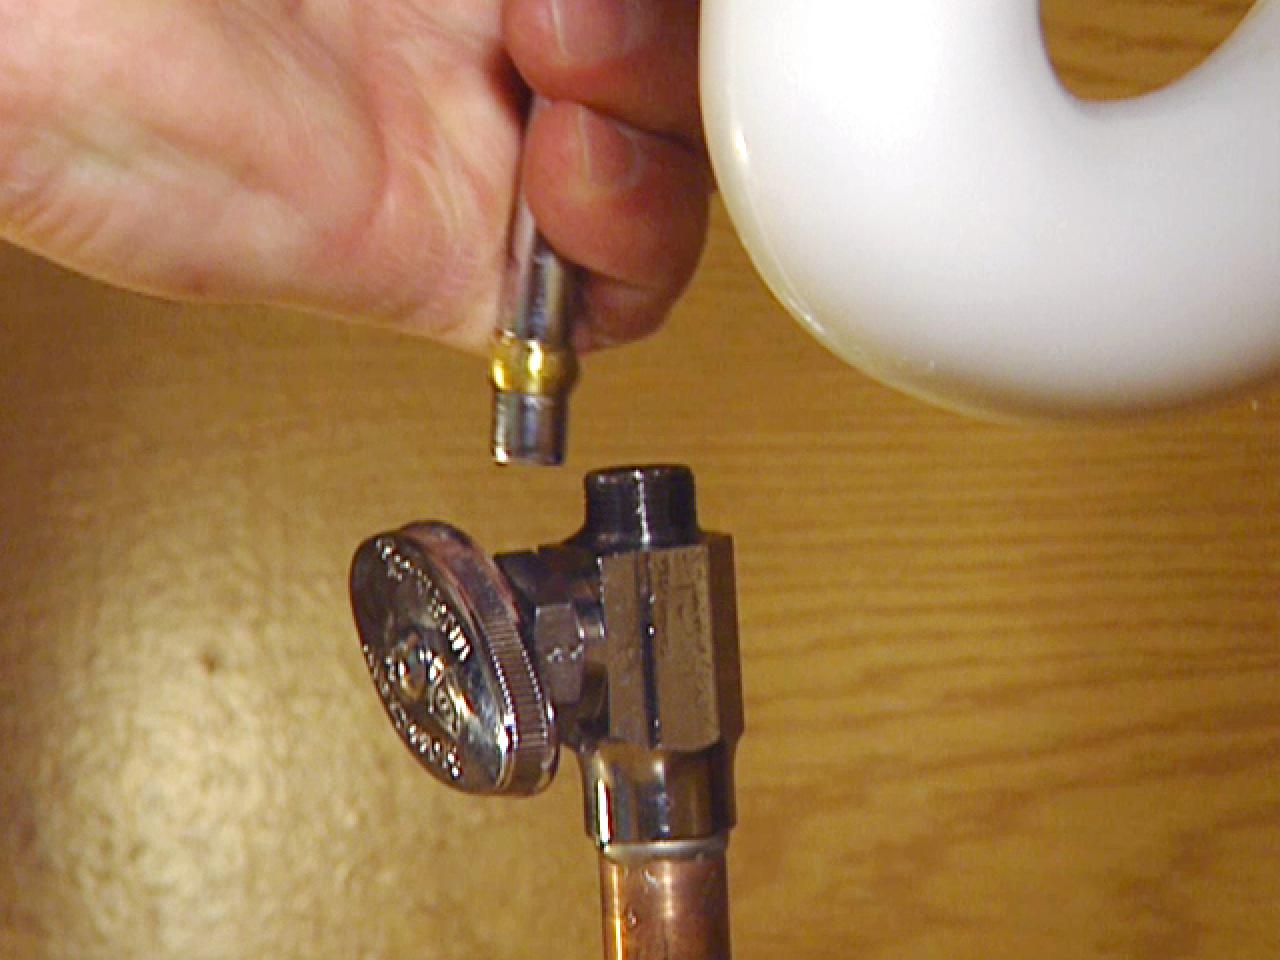 How To Replace Water Shutoff Valve Under Sink How To Shut Off Water Better Homes Gardens How